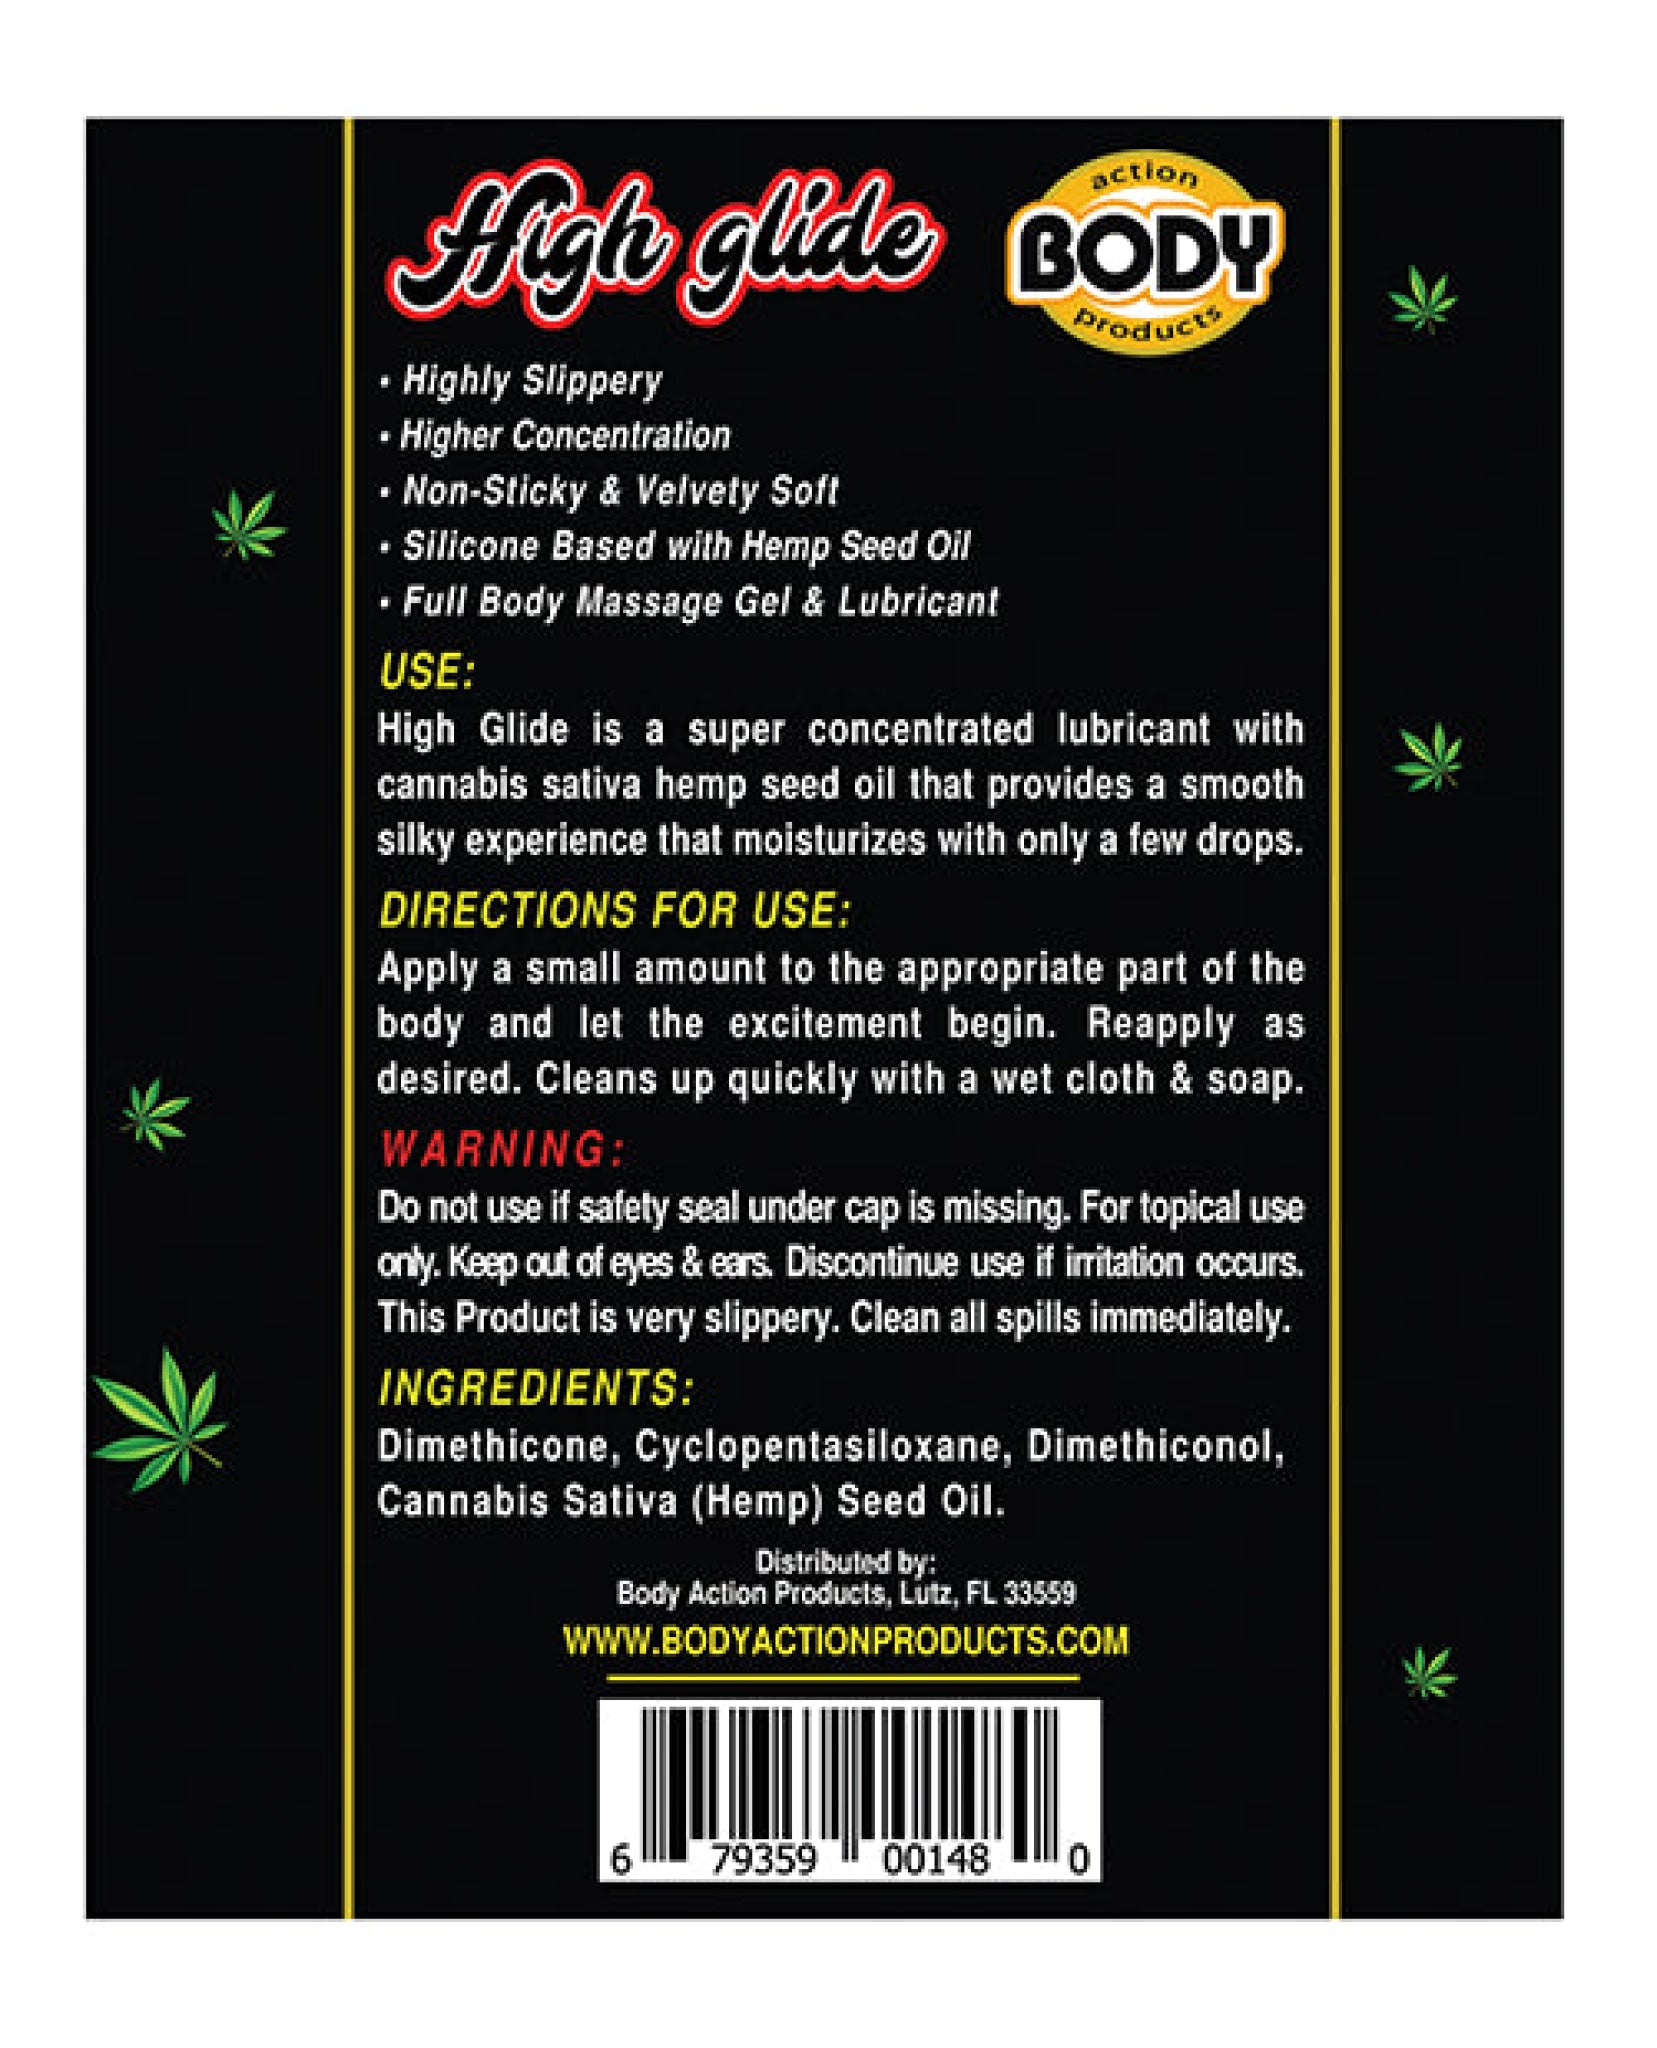 High Glide Erotic Lubricant Body Action